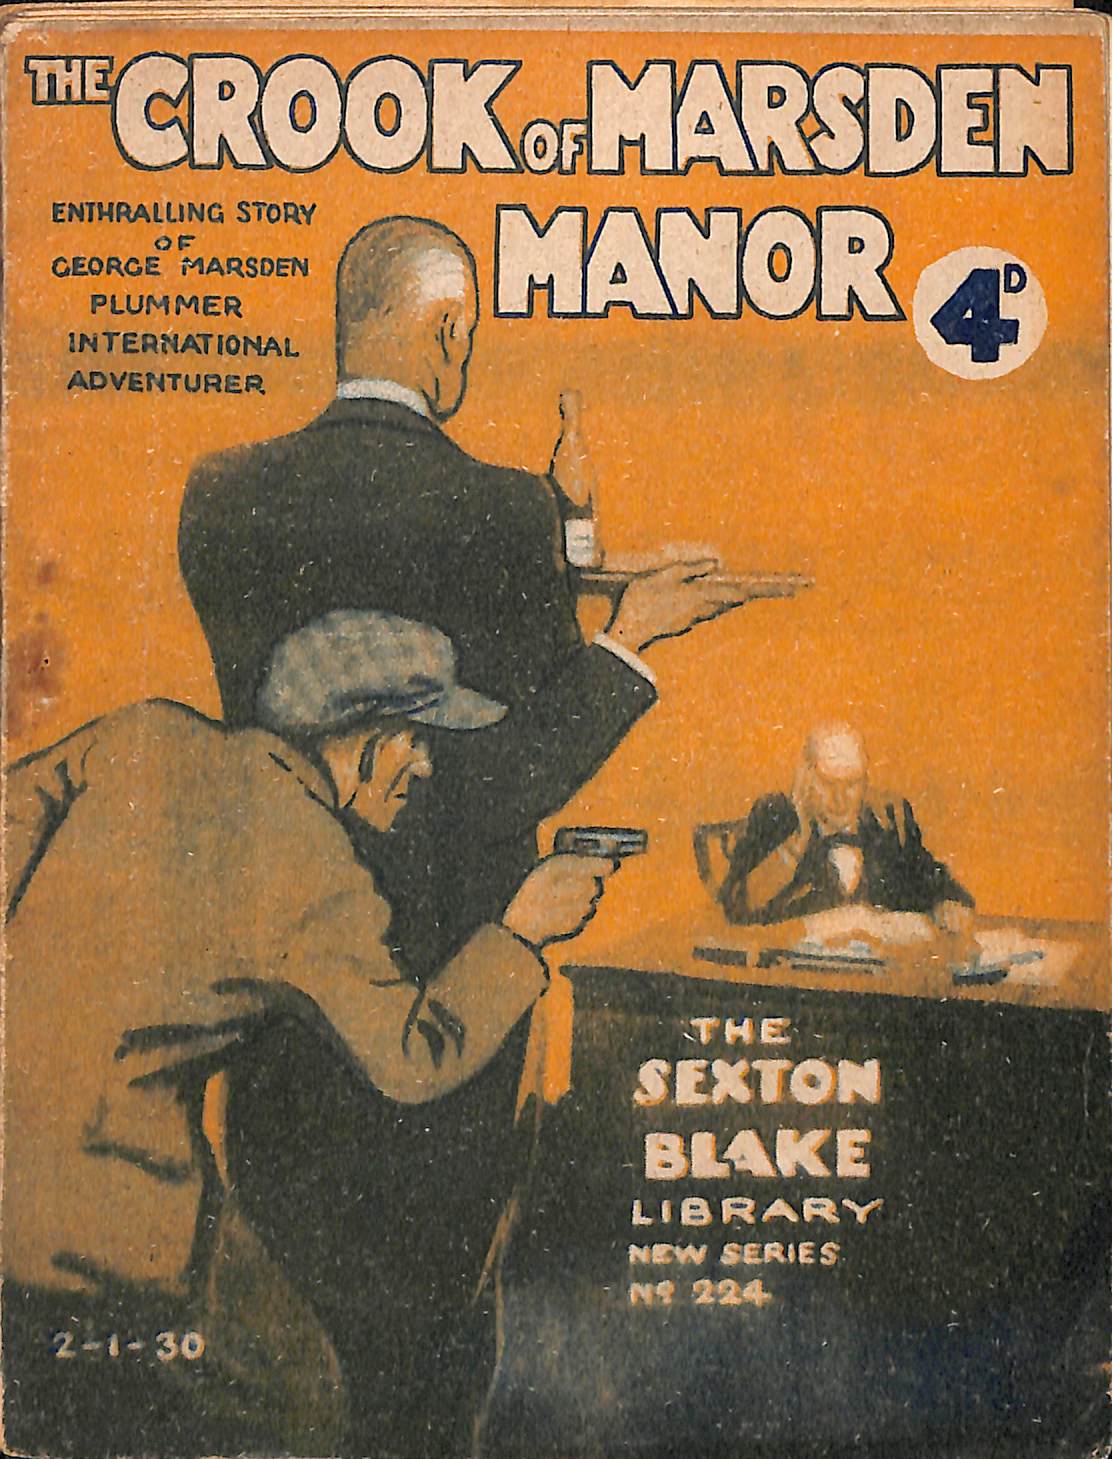 Comic Book Cover For Sexton Blake Library S2 224 - The Crook of Marsden Manor